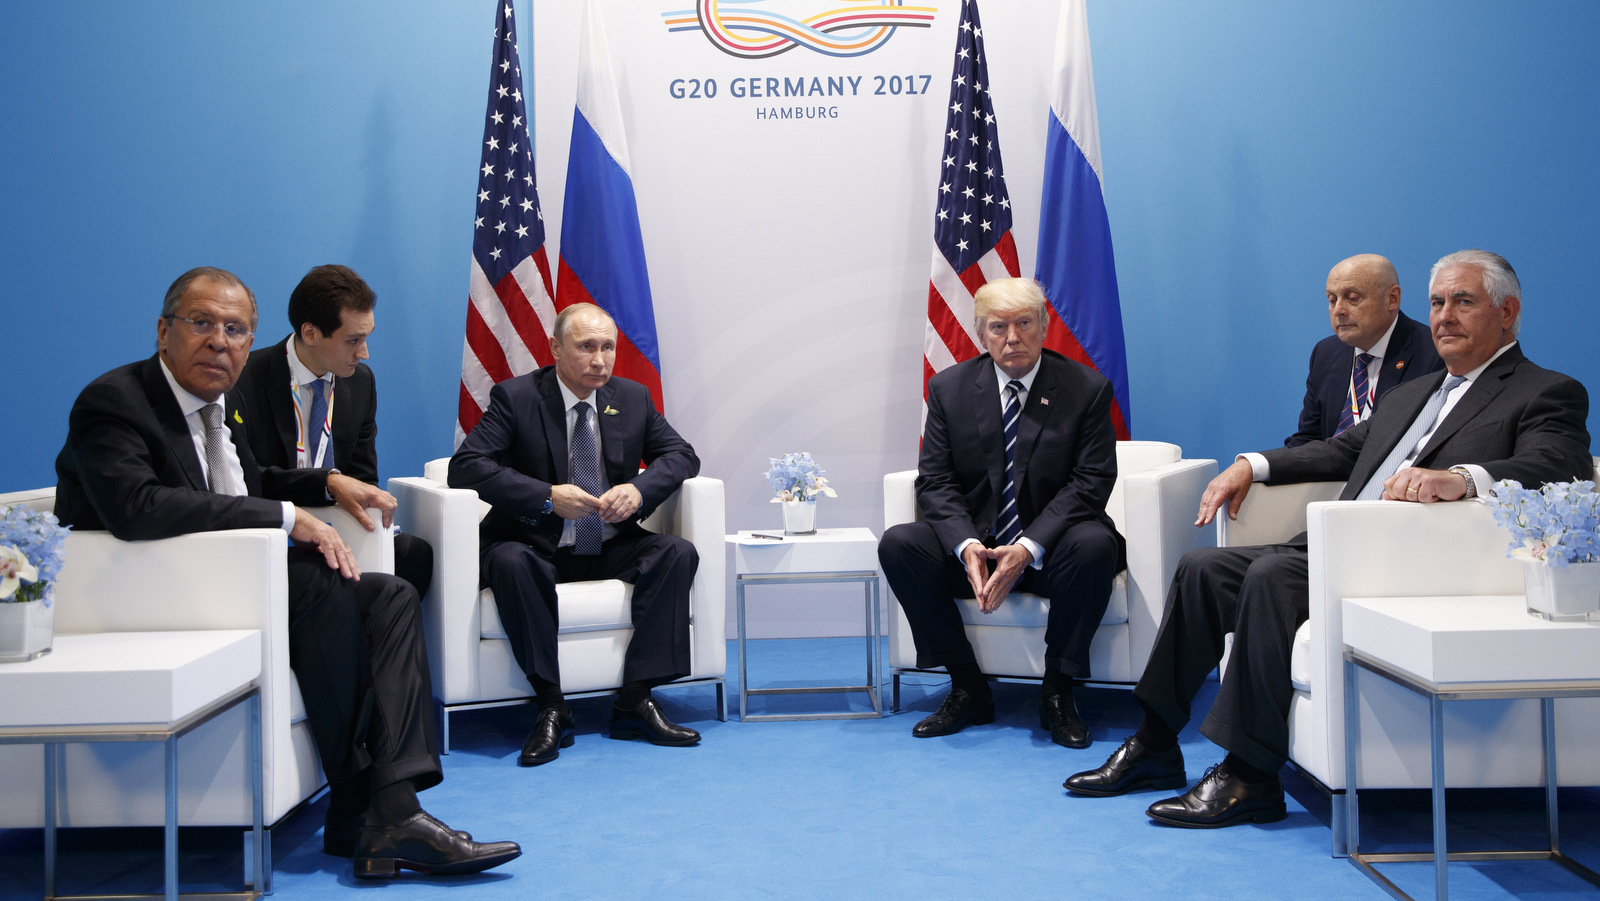 Donald Trump meets with Russian President Vladimir Putin at the G20 Summit, in Hamburg. A separate US-Russia-brokered truce for southern Syria, brokered by the U.S. and Russia, is finding support by both Iran and Israel.Russian Foreign Minister Sergey Lavrov is at left, Secretary of State Rex Tillerson is at right. (AP/Evan Vucci)